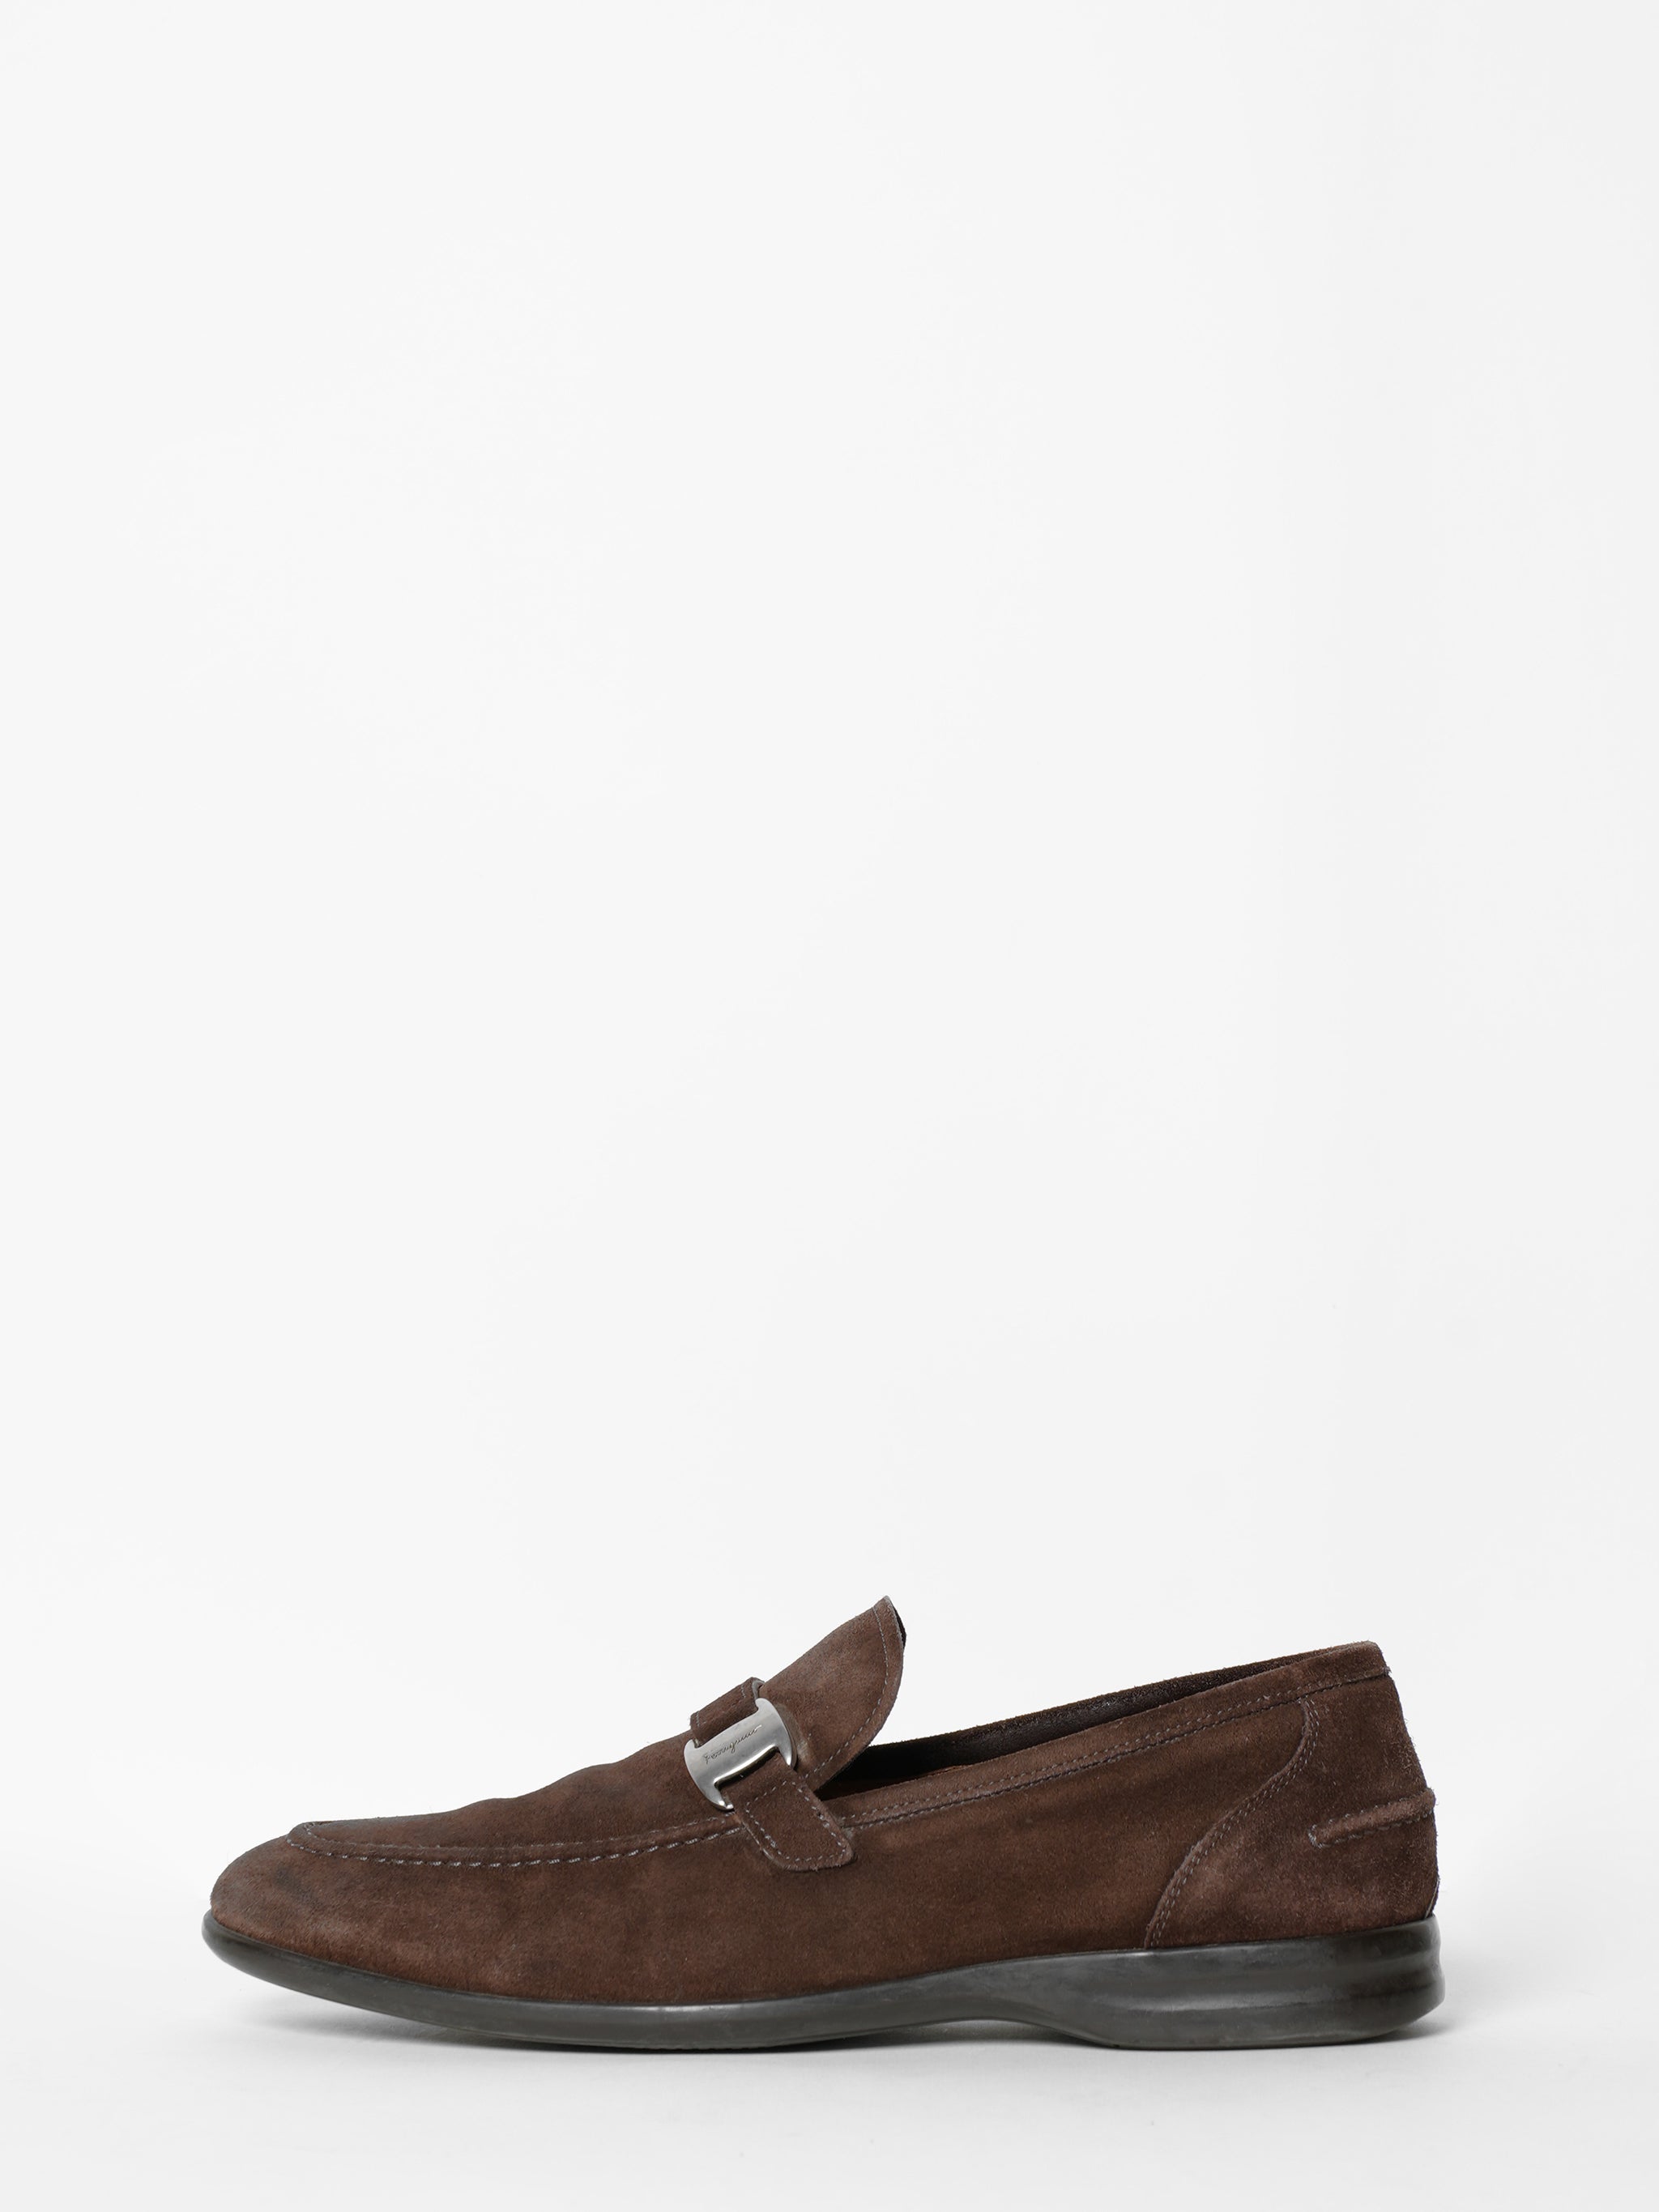 Ferragamo Brown Suede Leather Slip On Loafers